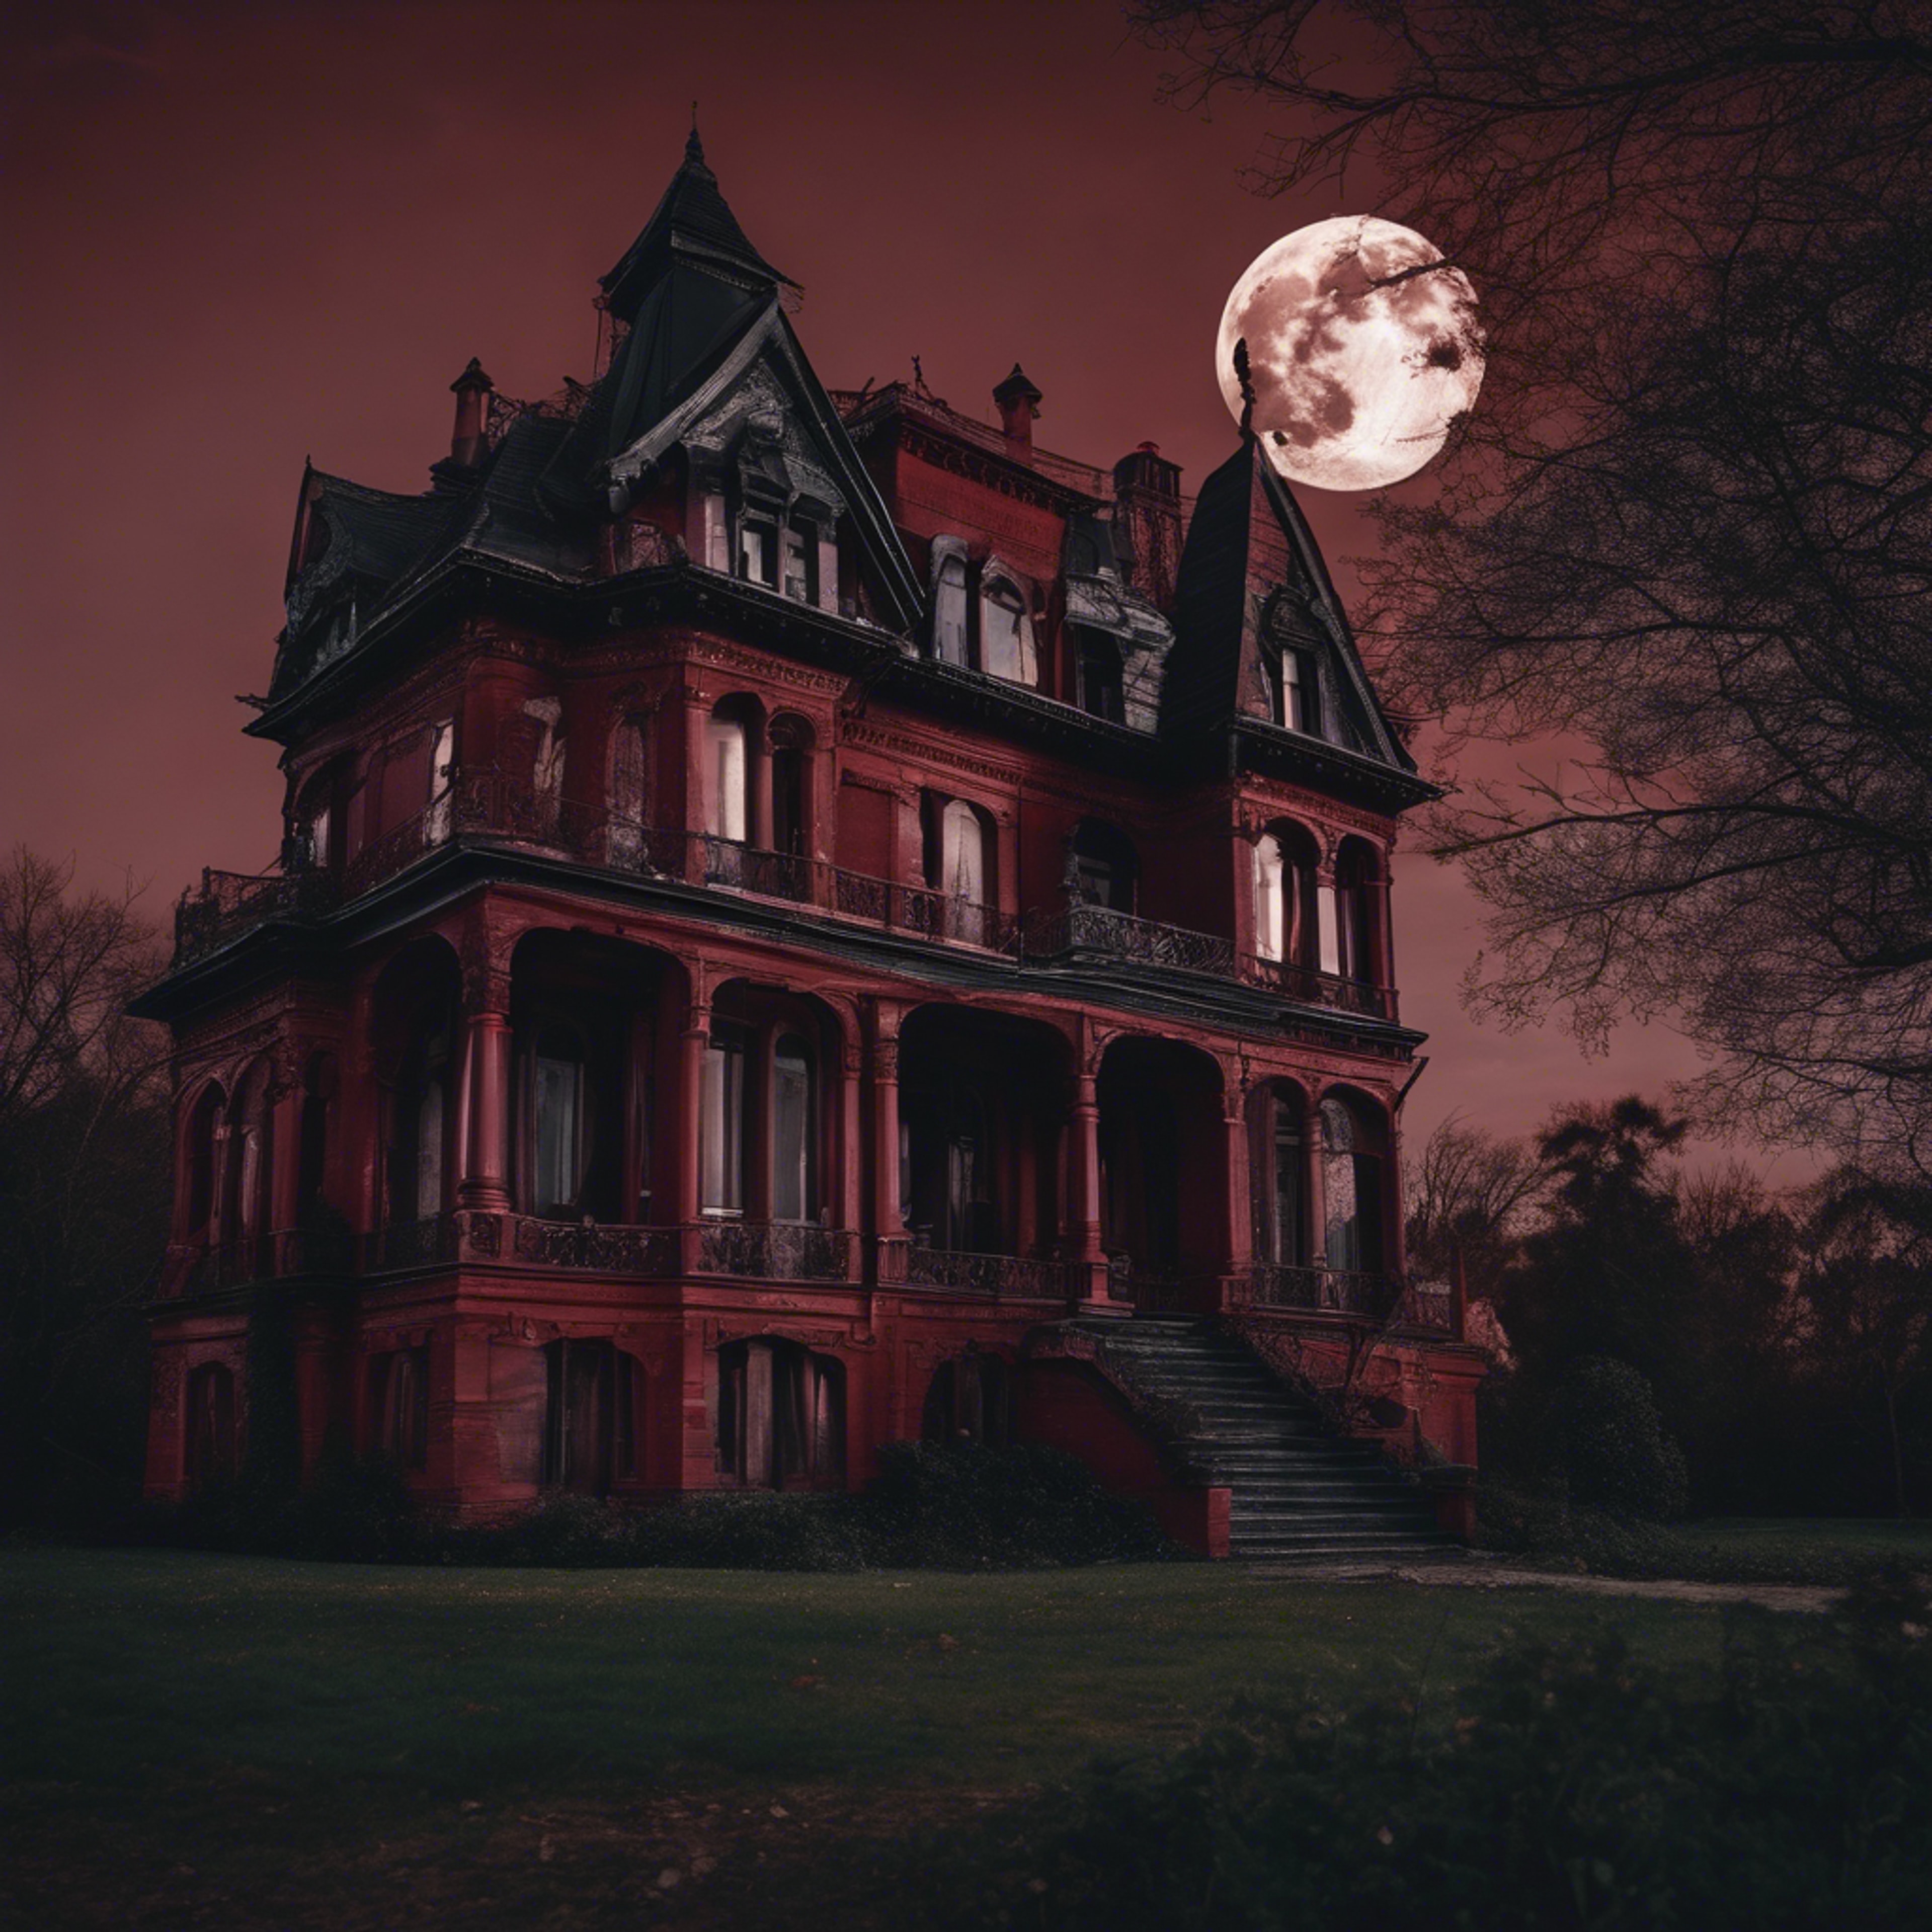 Moody view of an old Victorian mansion in dark red hues under a nearly full moon.壁紙[8b4d1d2d66a3409f8c39]